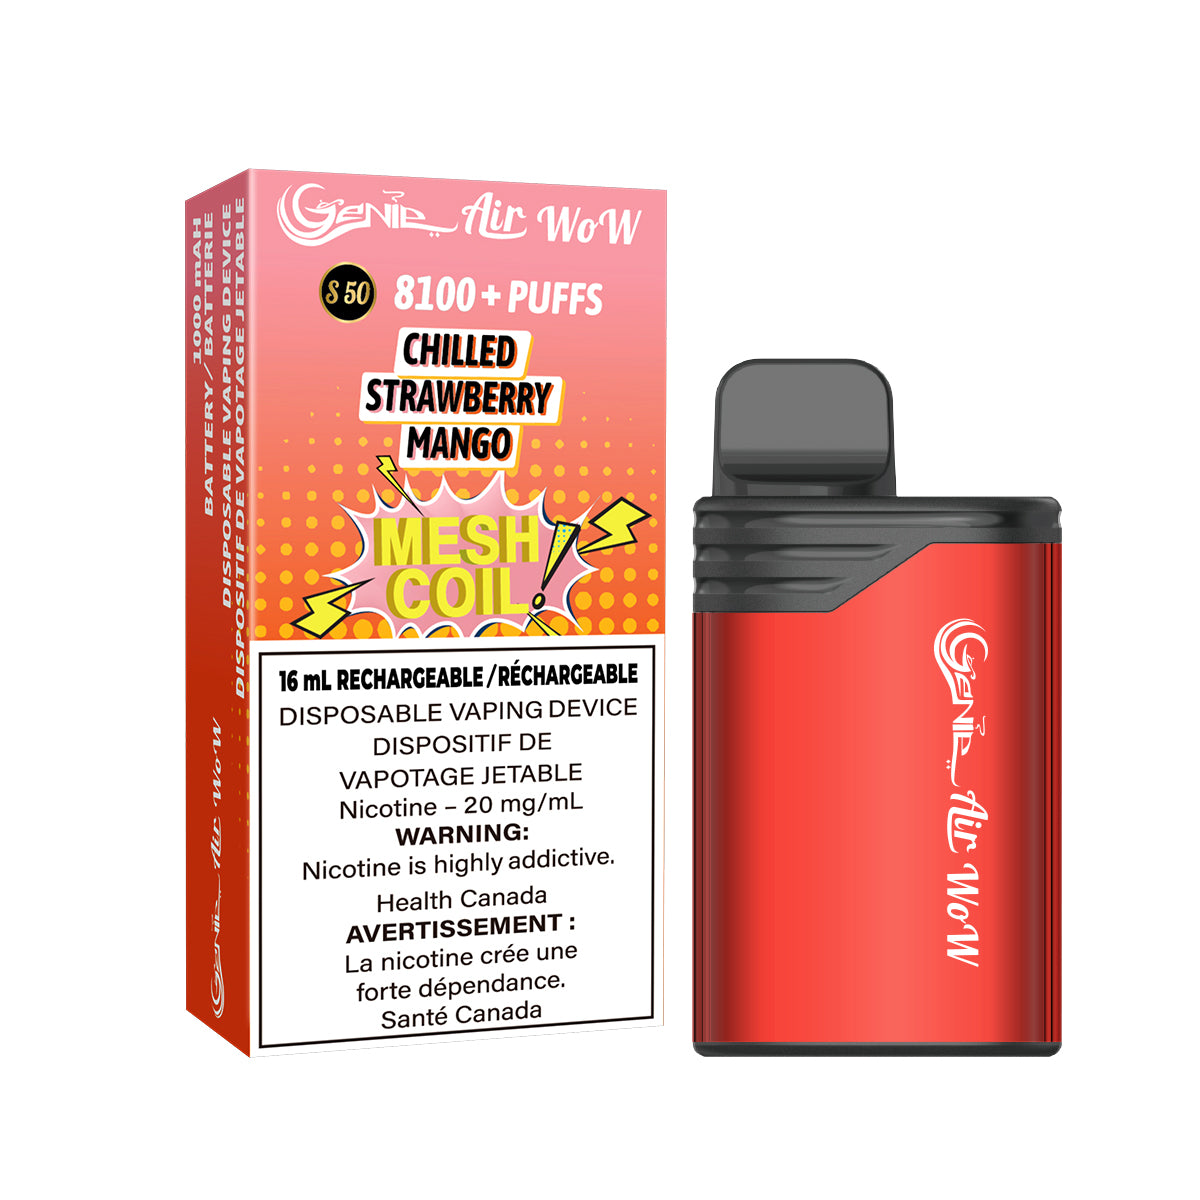 GENIE AIR WOW - CHilled strawberry mango 8100 Puffs  20 mg / mL Salt Nicotine  Juice Capacity: 16 mL  Battery: 1000 mAh Rechargeable   Mesh Coil Technology    s50